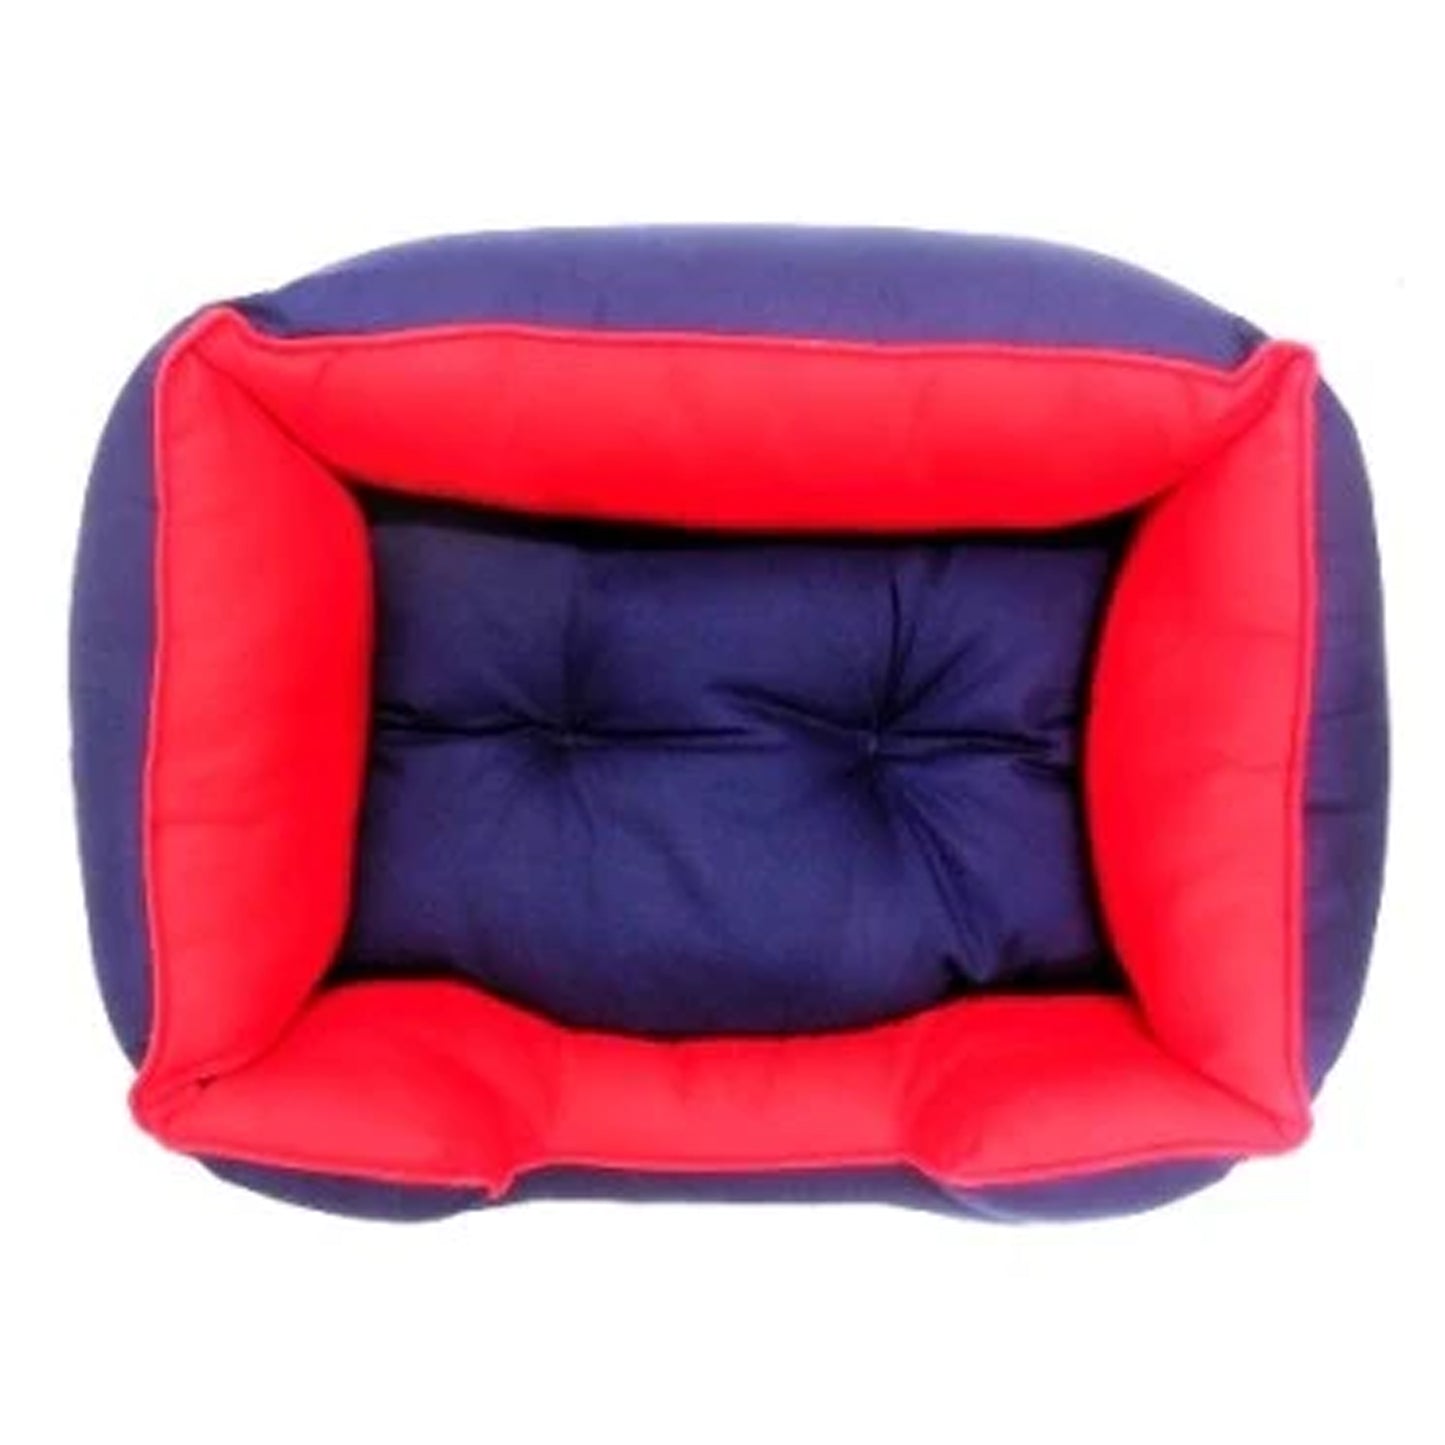 Copy of Kennel Sofa Bed